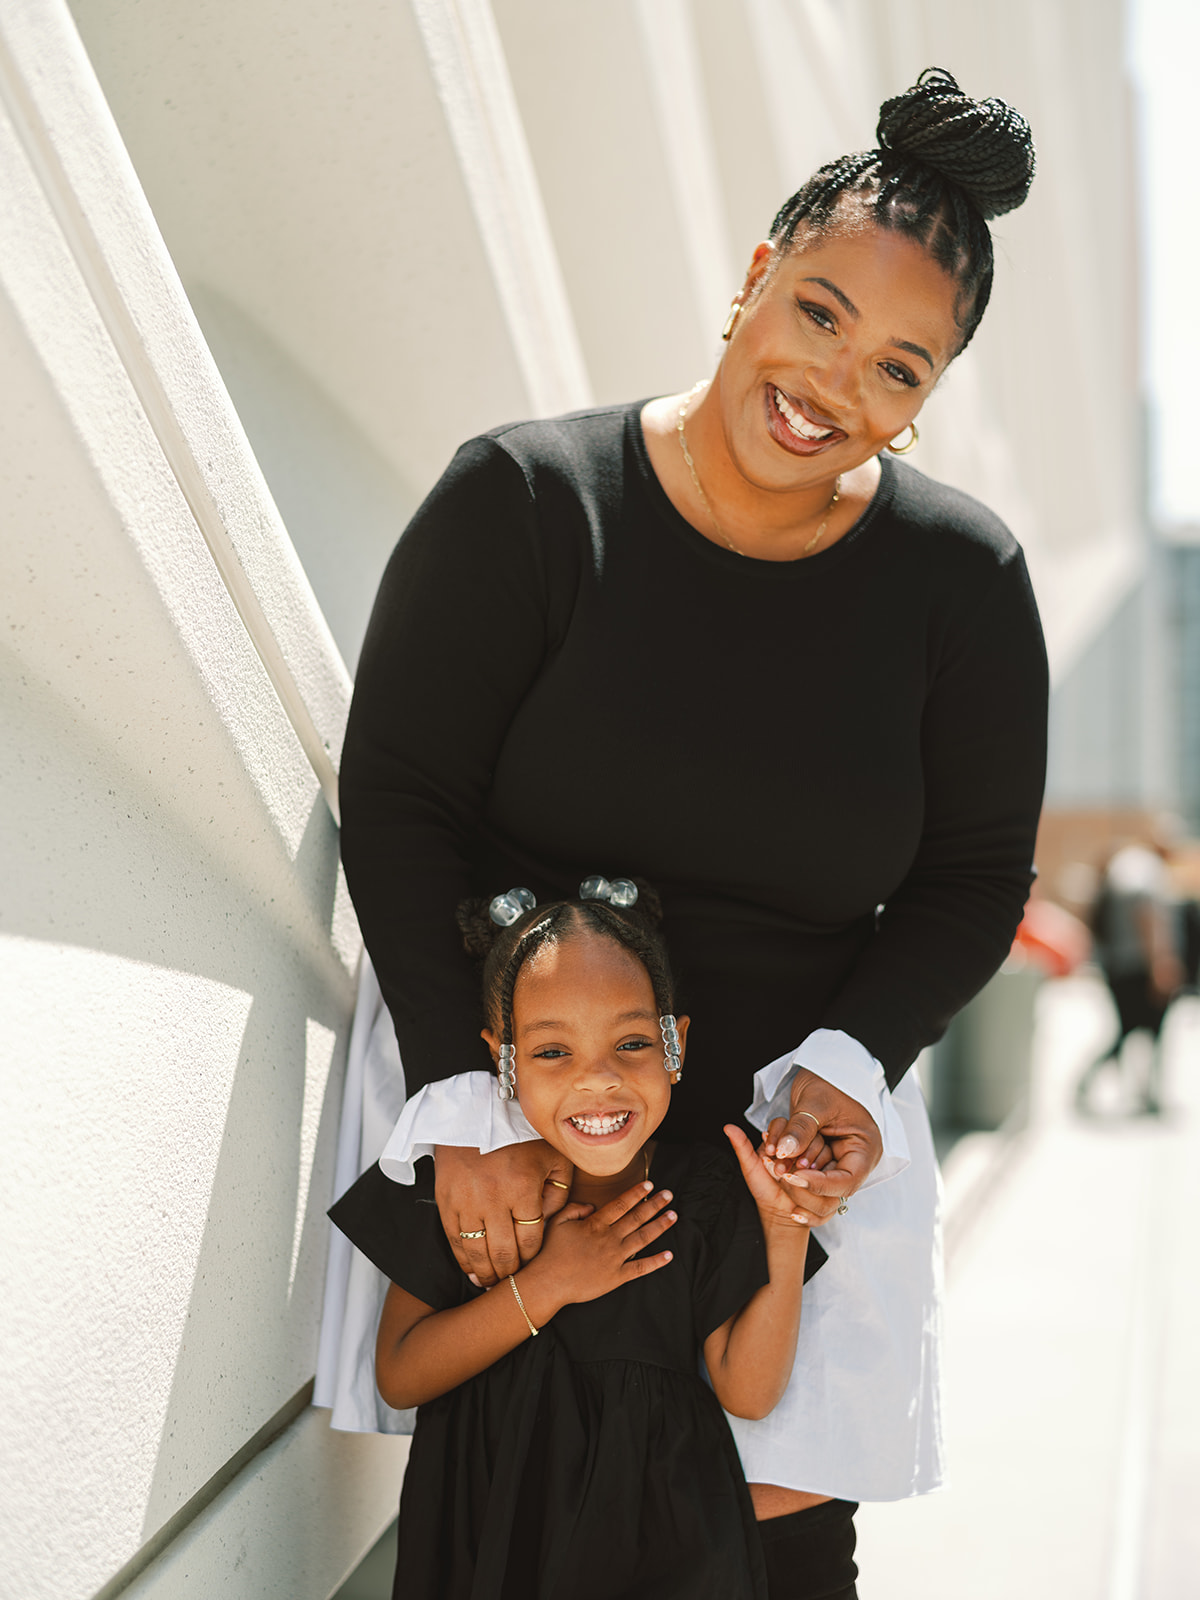 Mother & Daughter Portrait Session in Downtown Los Angeles, CA.   Walt Disney Concert Hall and The Broad Museum